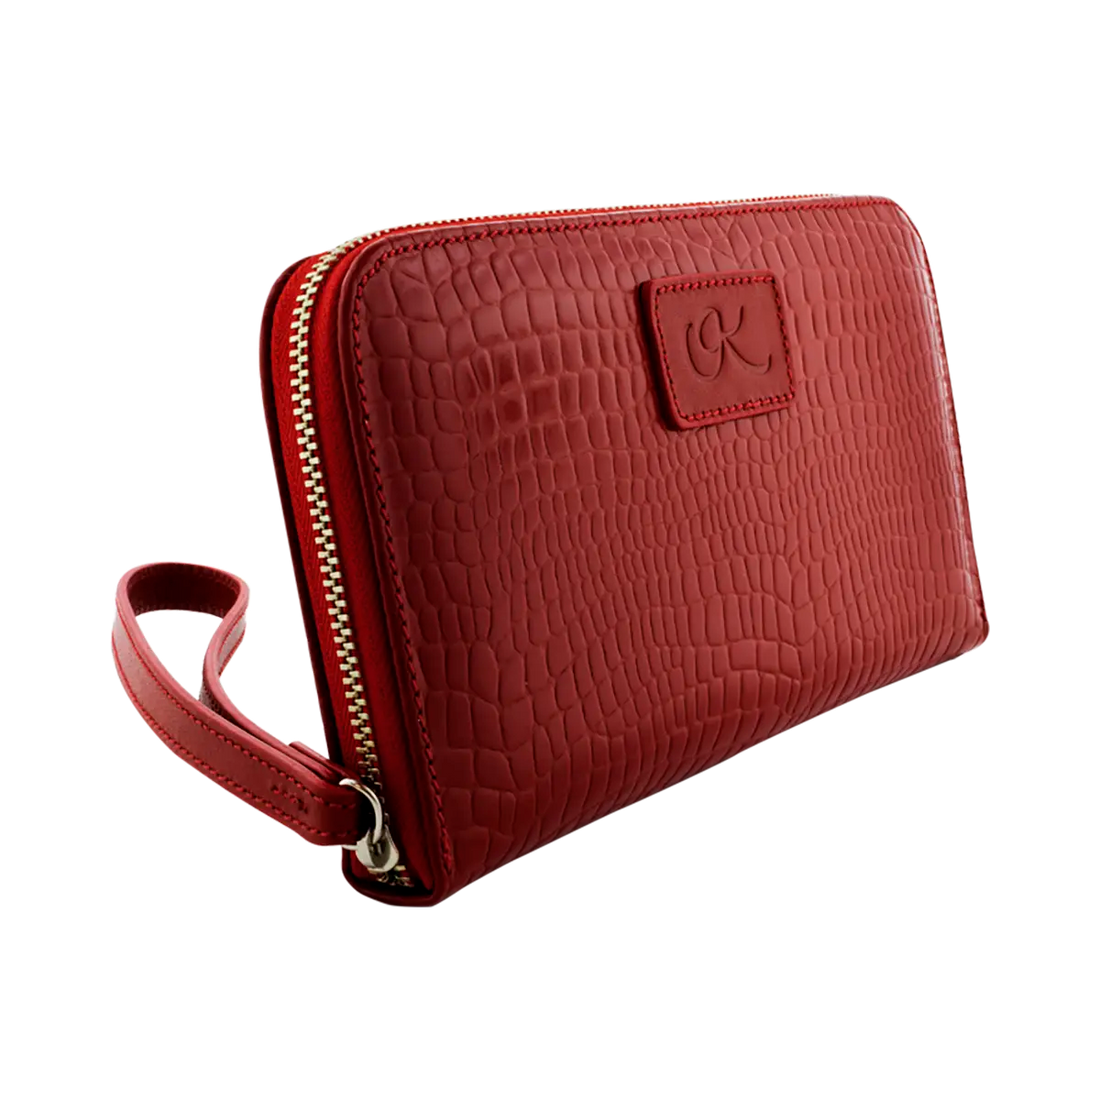 largered leather wallet with hand strap. Fashion Accessories for women shop in San Diego, CA.